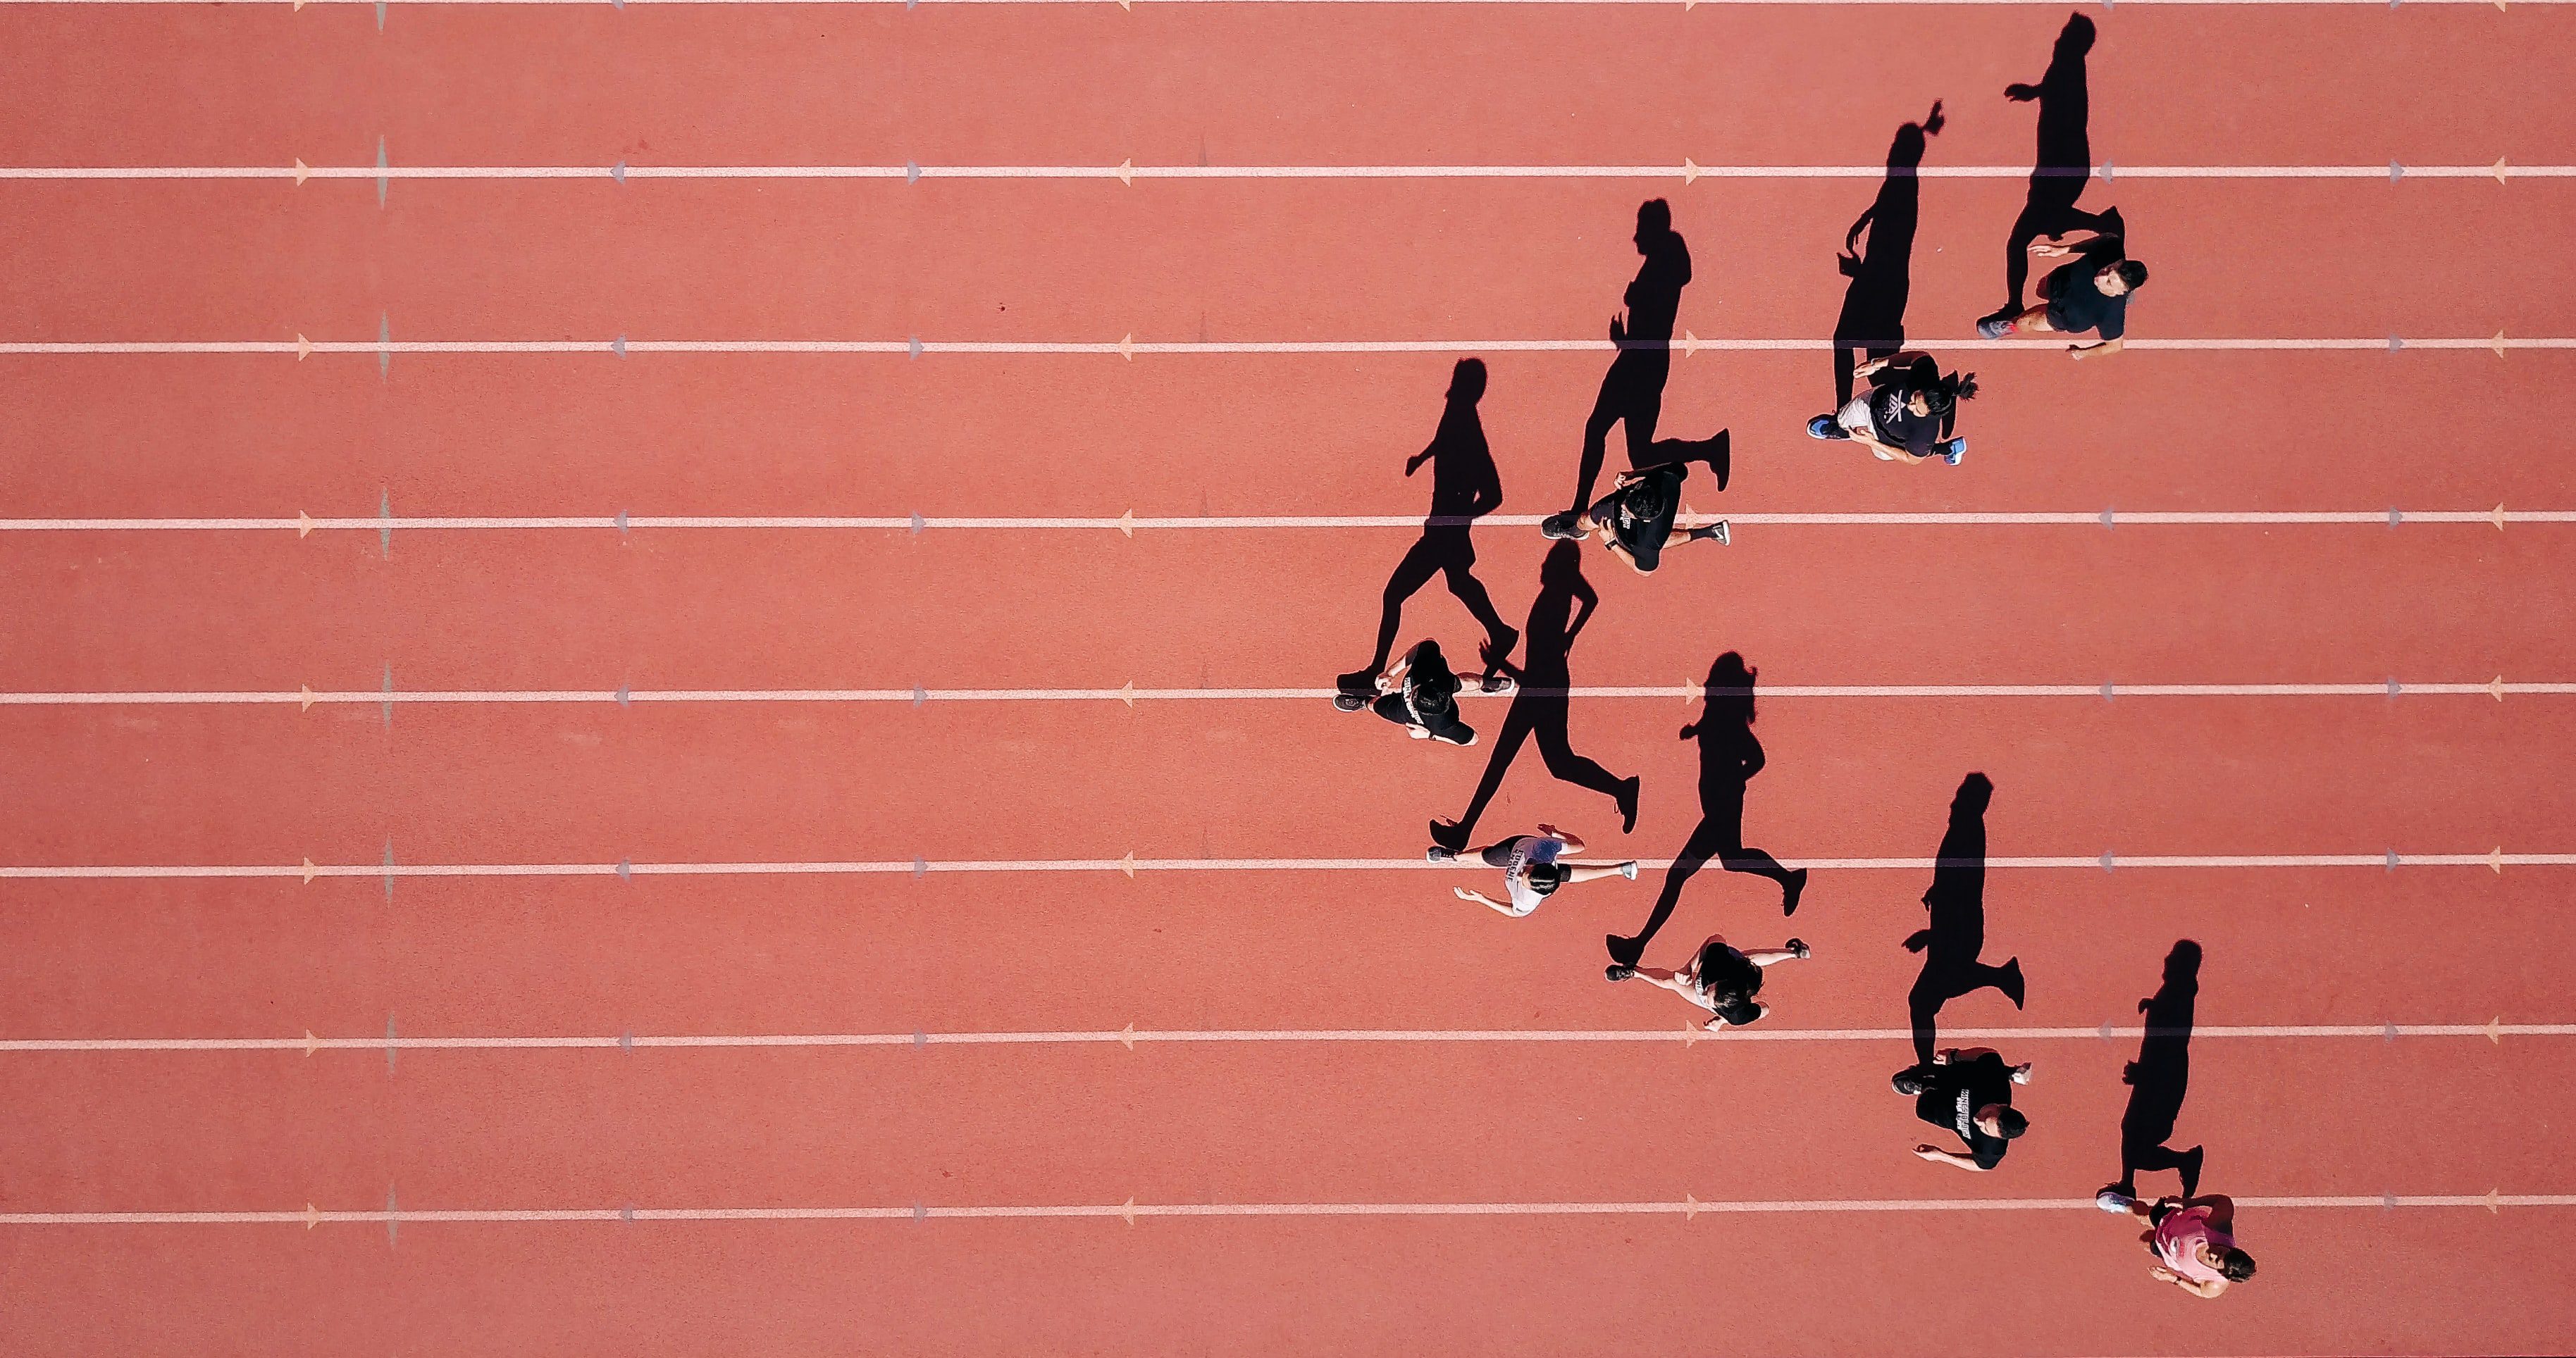 Ariel view of track runners, running in a horizontal v formation towards the centre of the image.